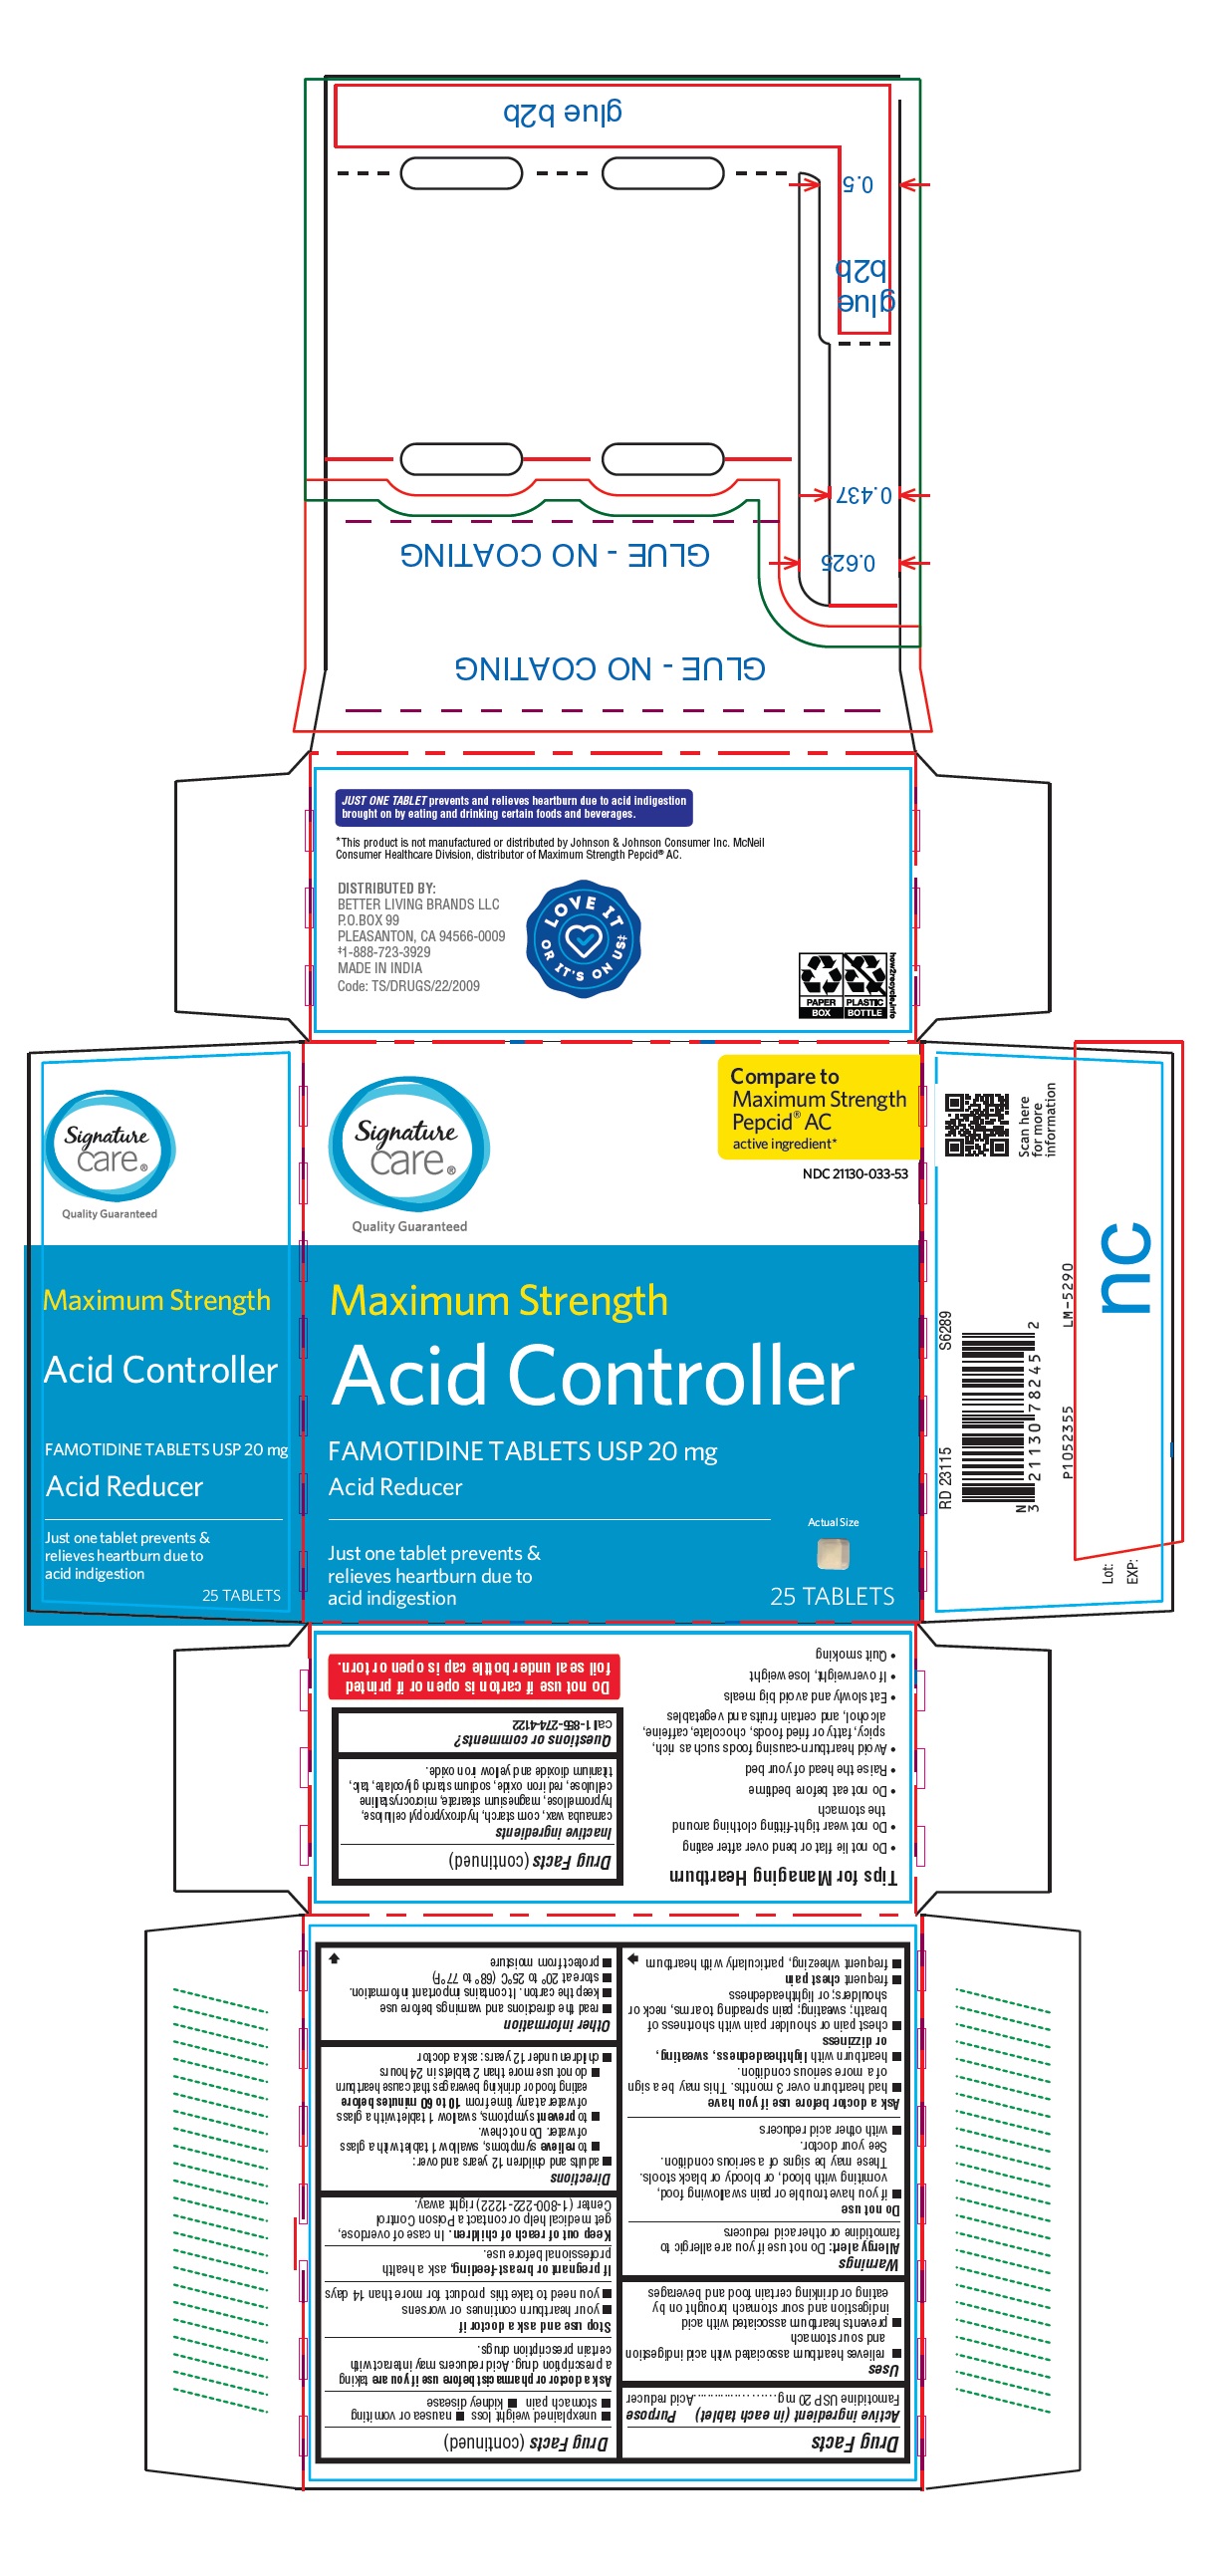 PACKAGE LABEL-PRINCIPAL DISPLAY PANEL -20 mg (25 Tablets, Container Carton Label)